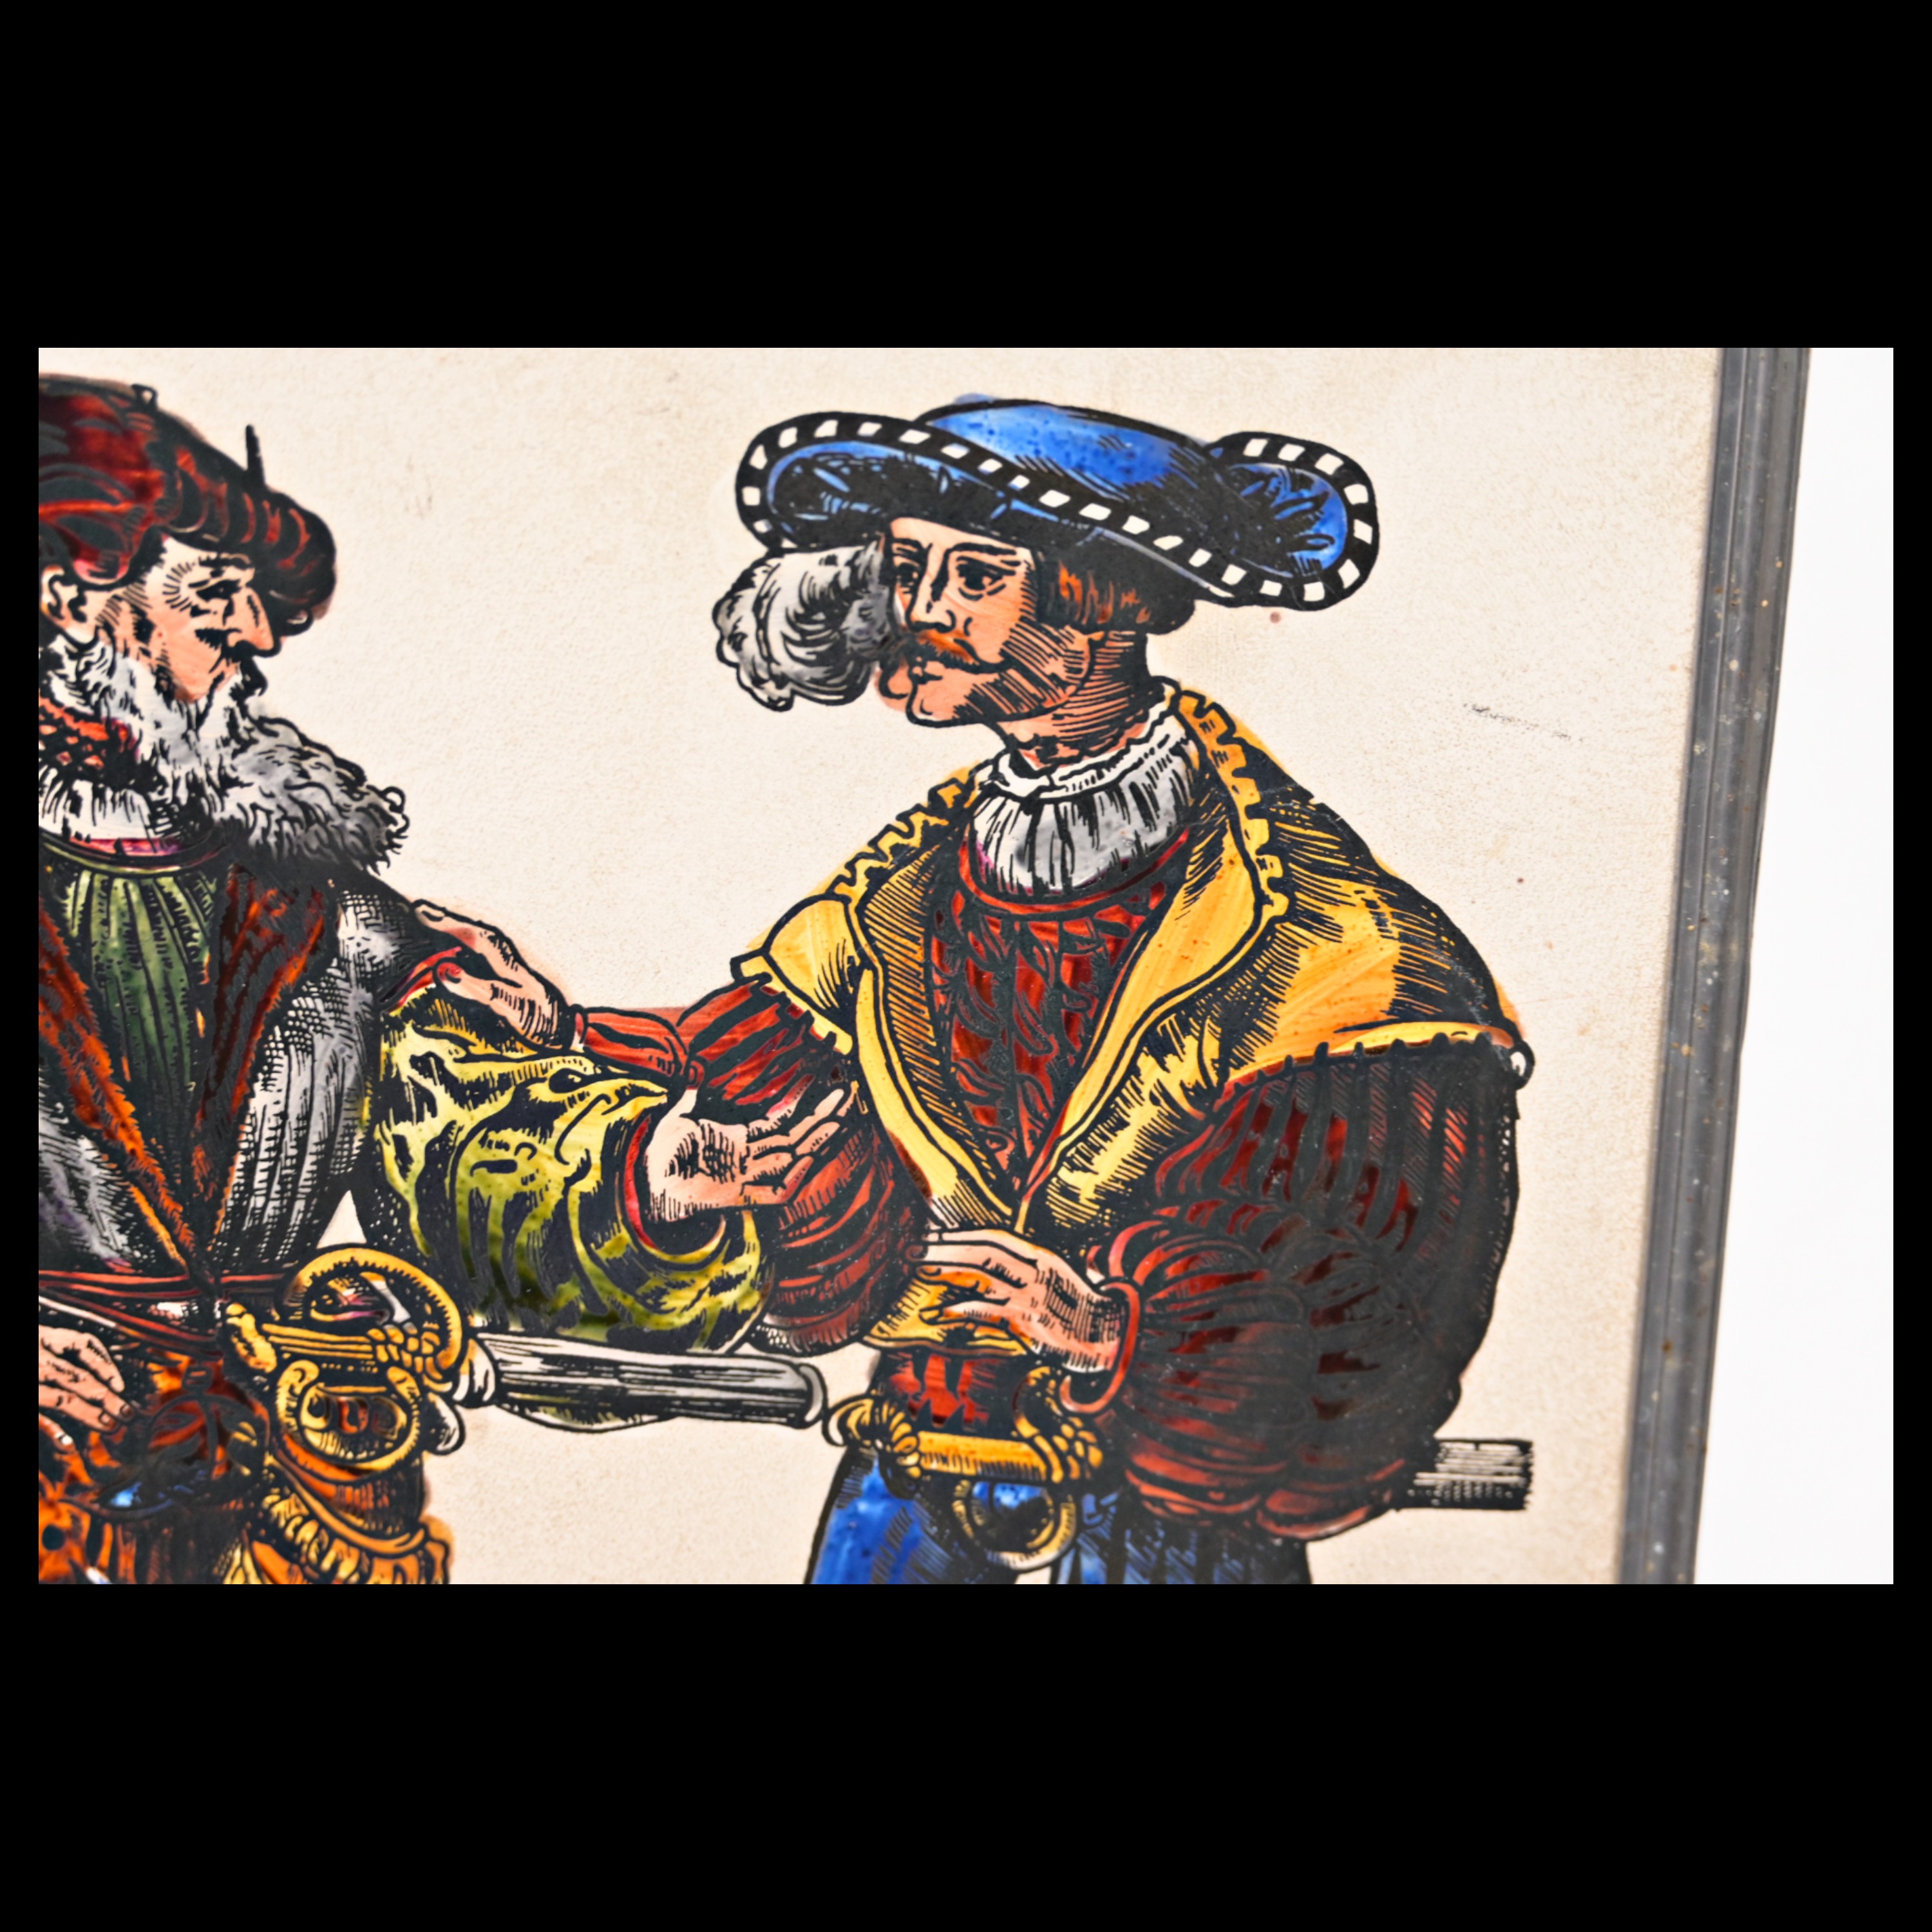 Landsknechts, Painting on glass in the style of 16th century engravings. - Image 4 of 8